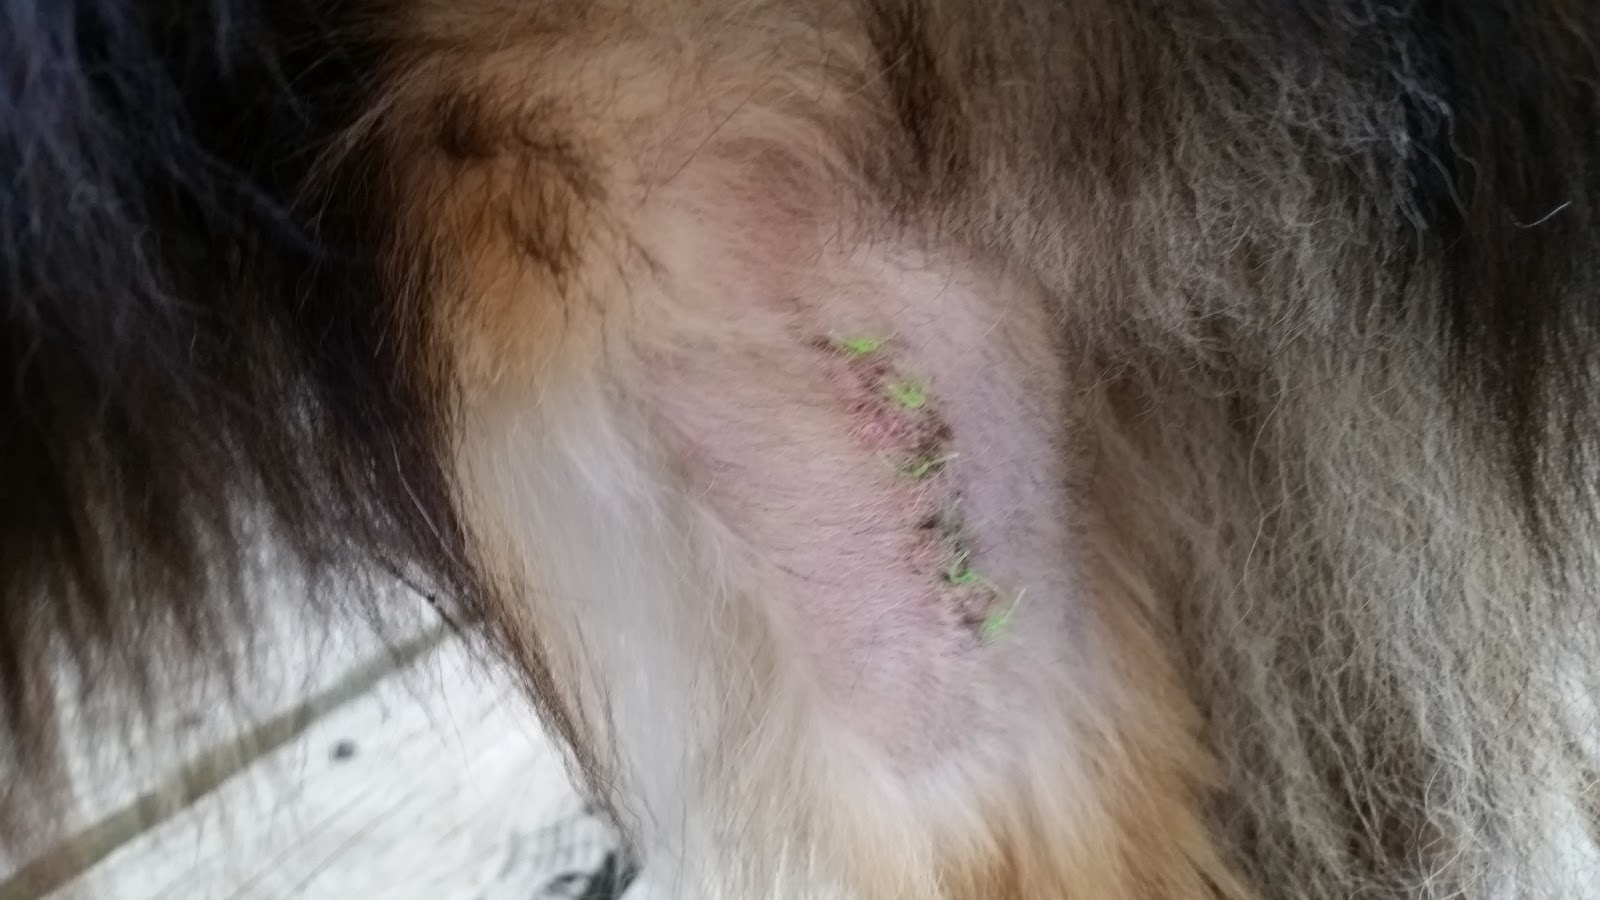 Dogs with chris7 Sky's Mast Cell Tumors Diagnosis, Surgery, and Chemotherapy with KinavetCA1